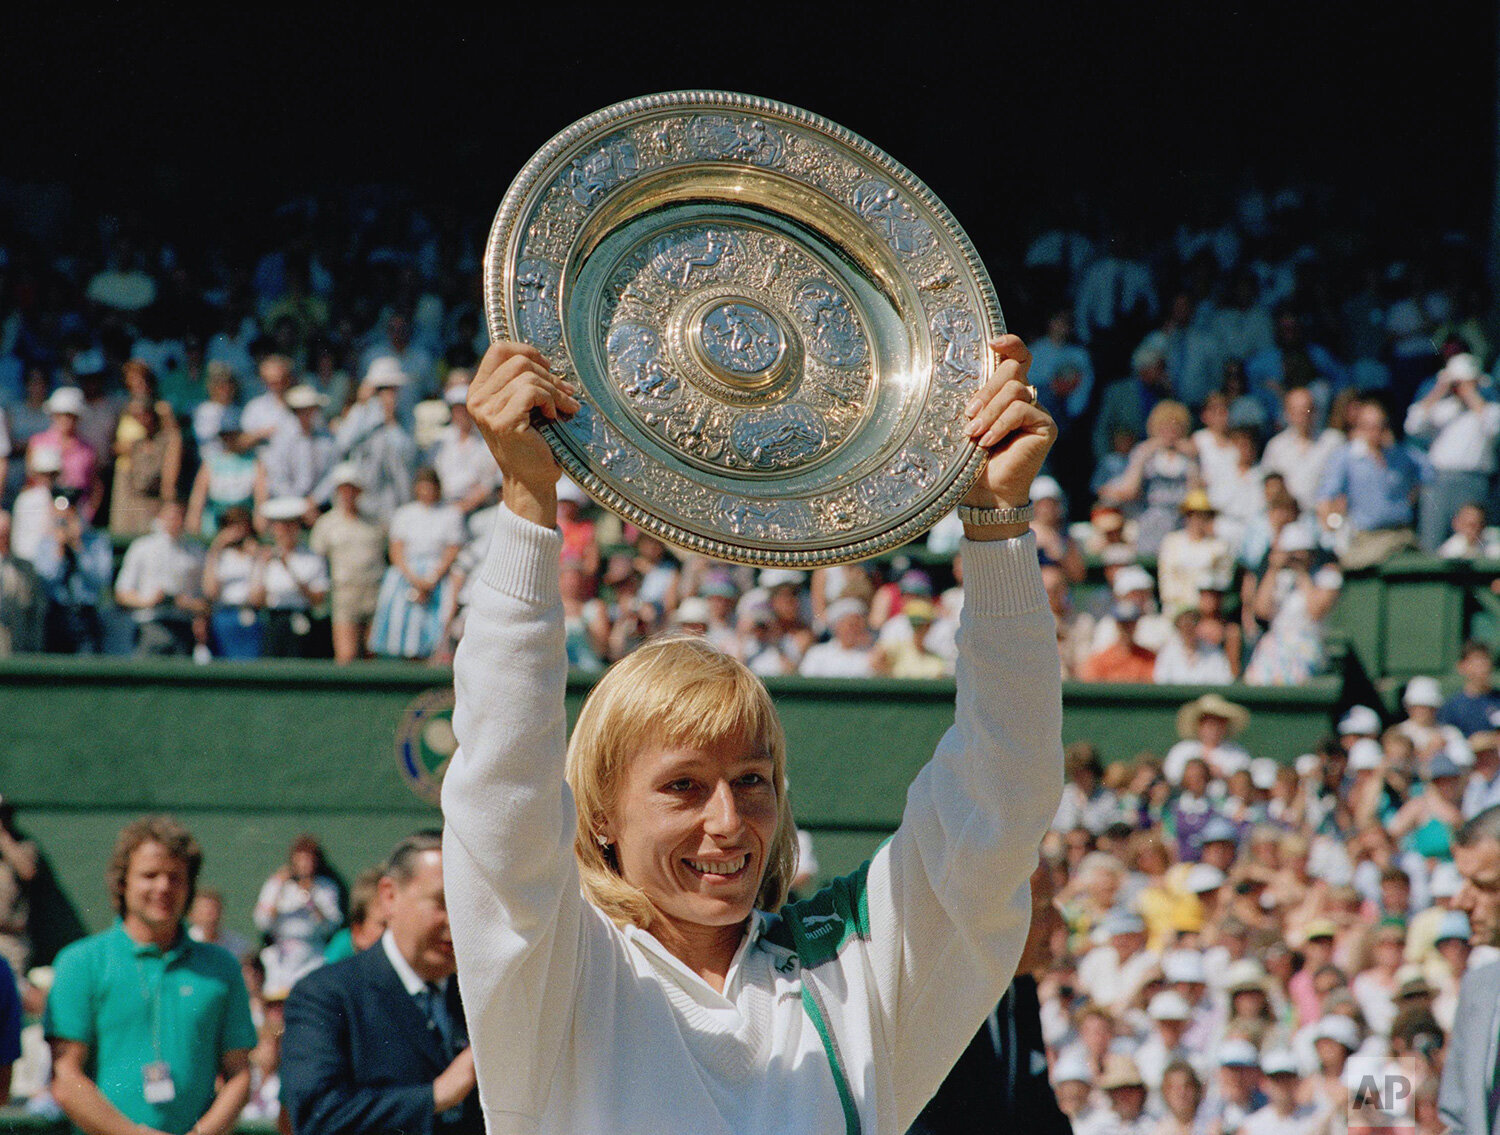  Martina Navratilova holds up her trophy after winning the women's singles championship for a record eight times on the Centre Court at Wimbledon, England, Saturday, July 4, 1987. Navratilova defeated Steffi Graf 7-5, 6-4 to win the championship. (AP